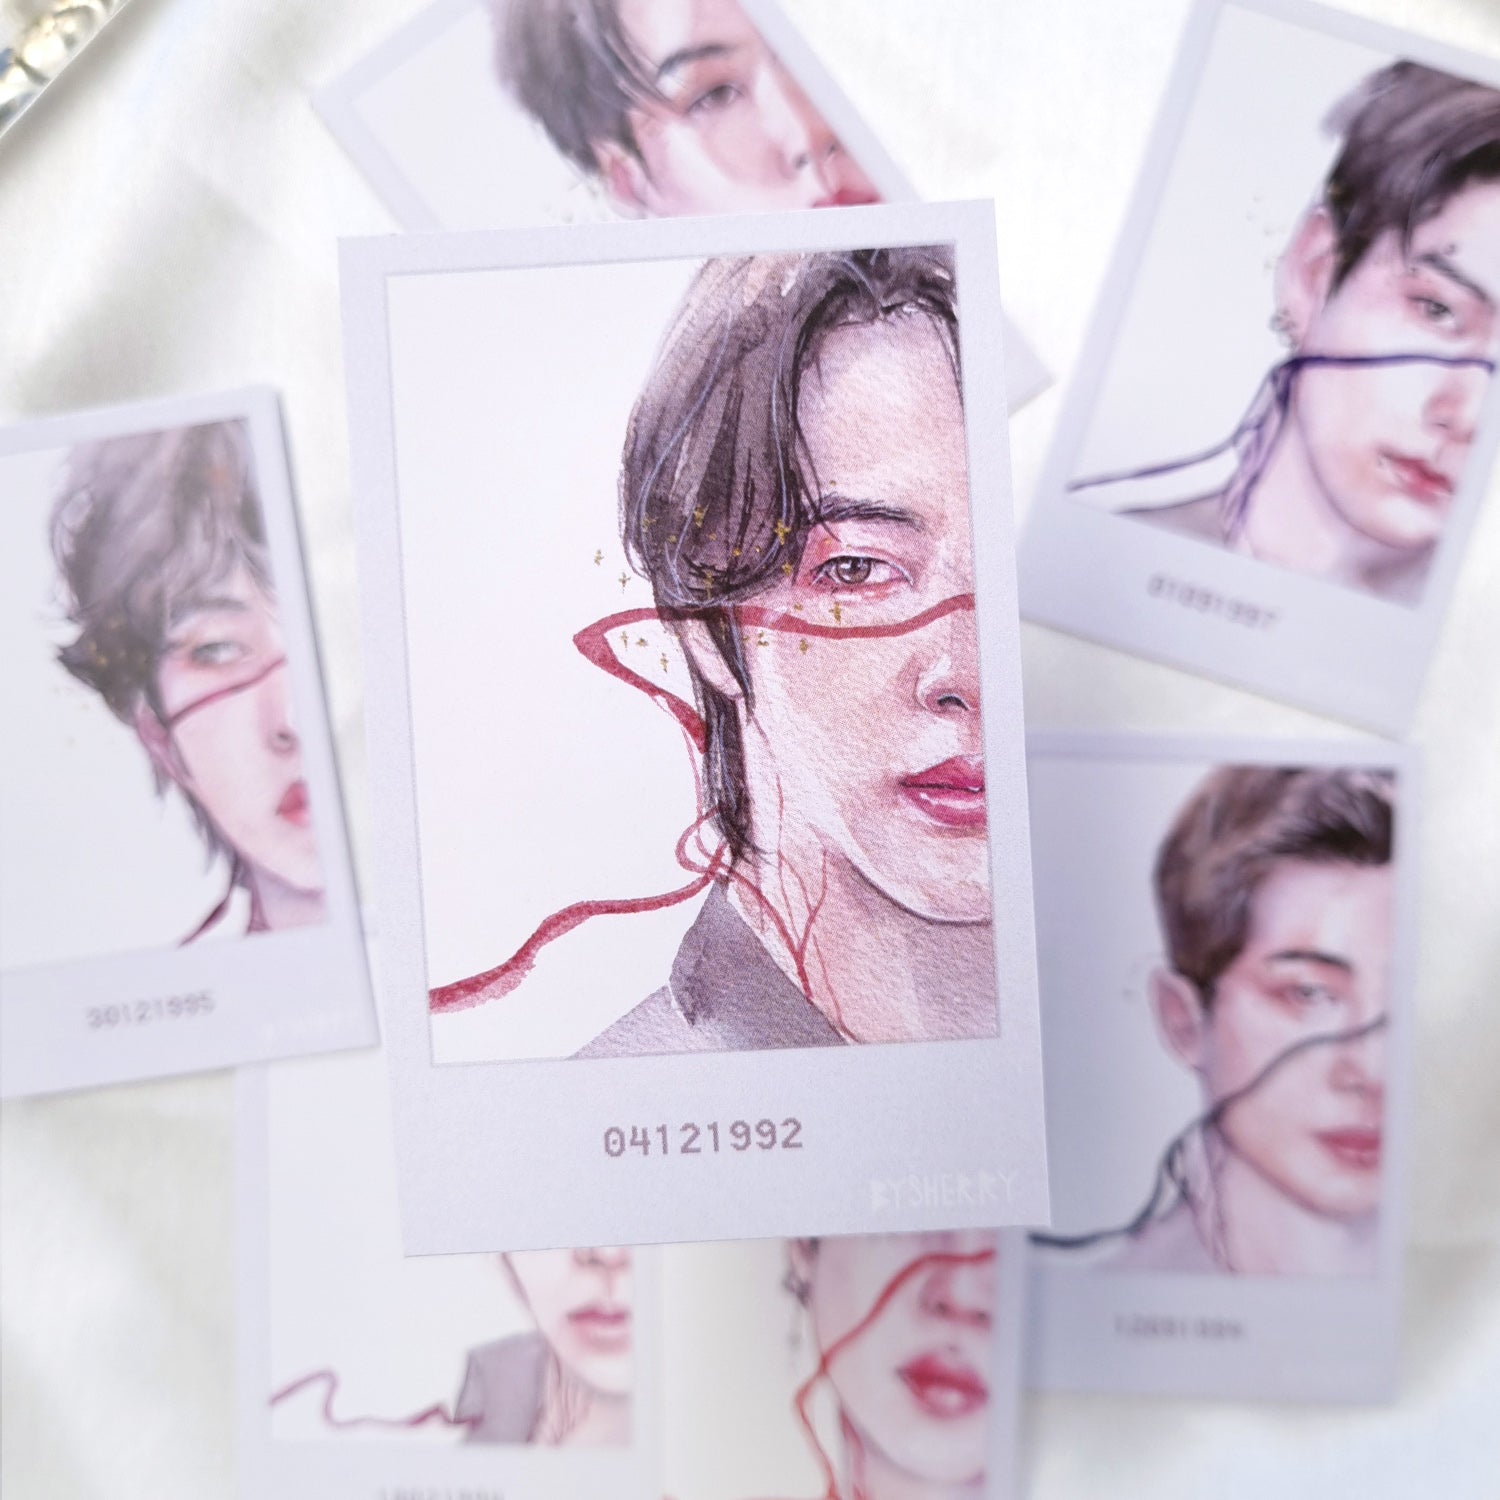 BTS "String of Fate" Aesthetic Photocard-style Art Prints - Set of 7